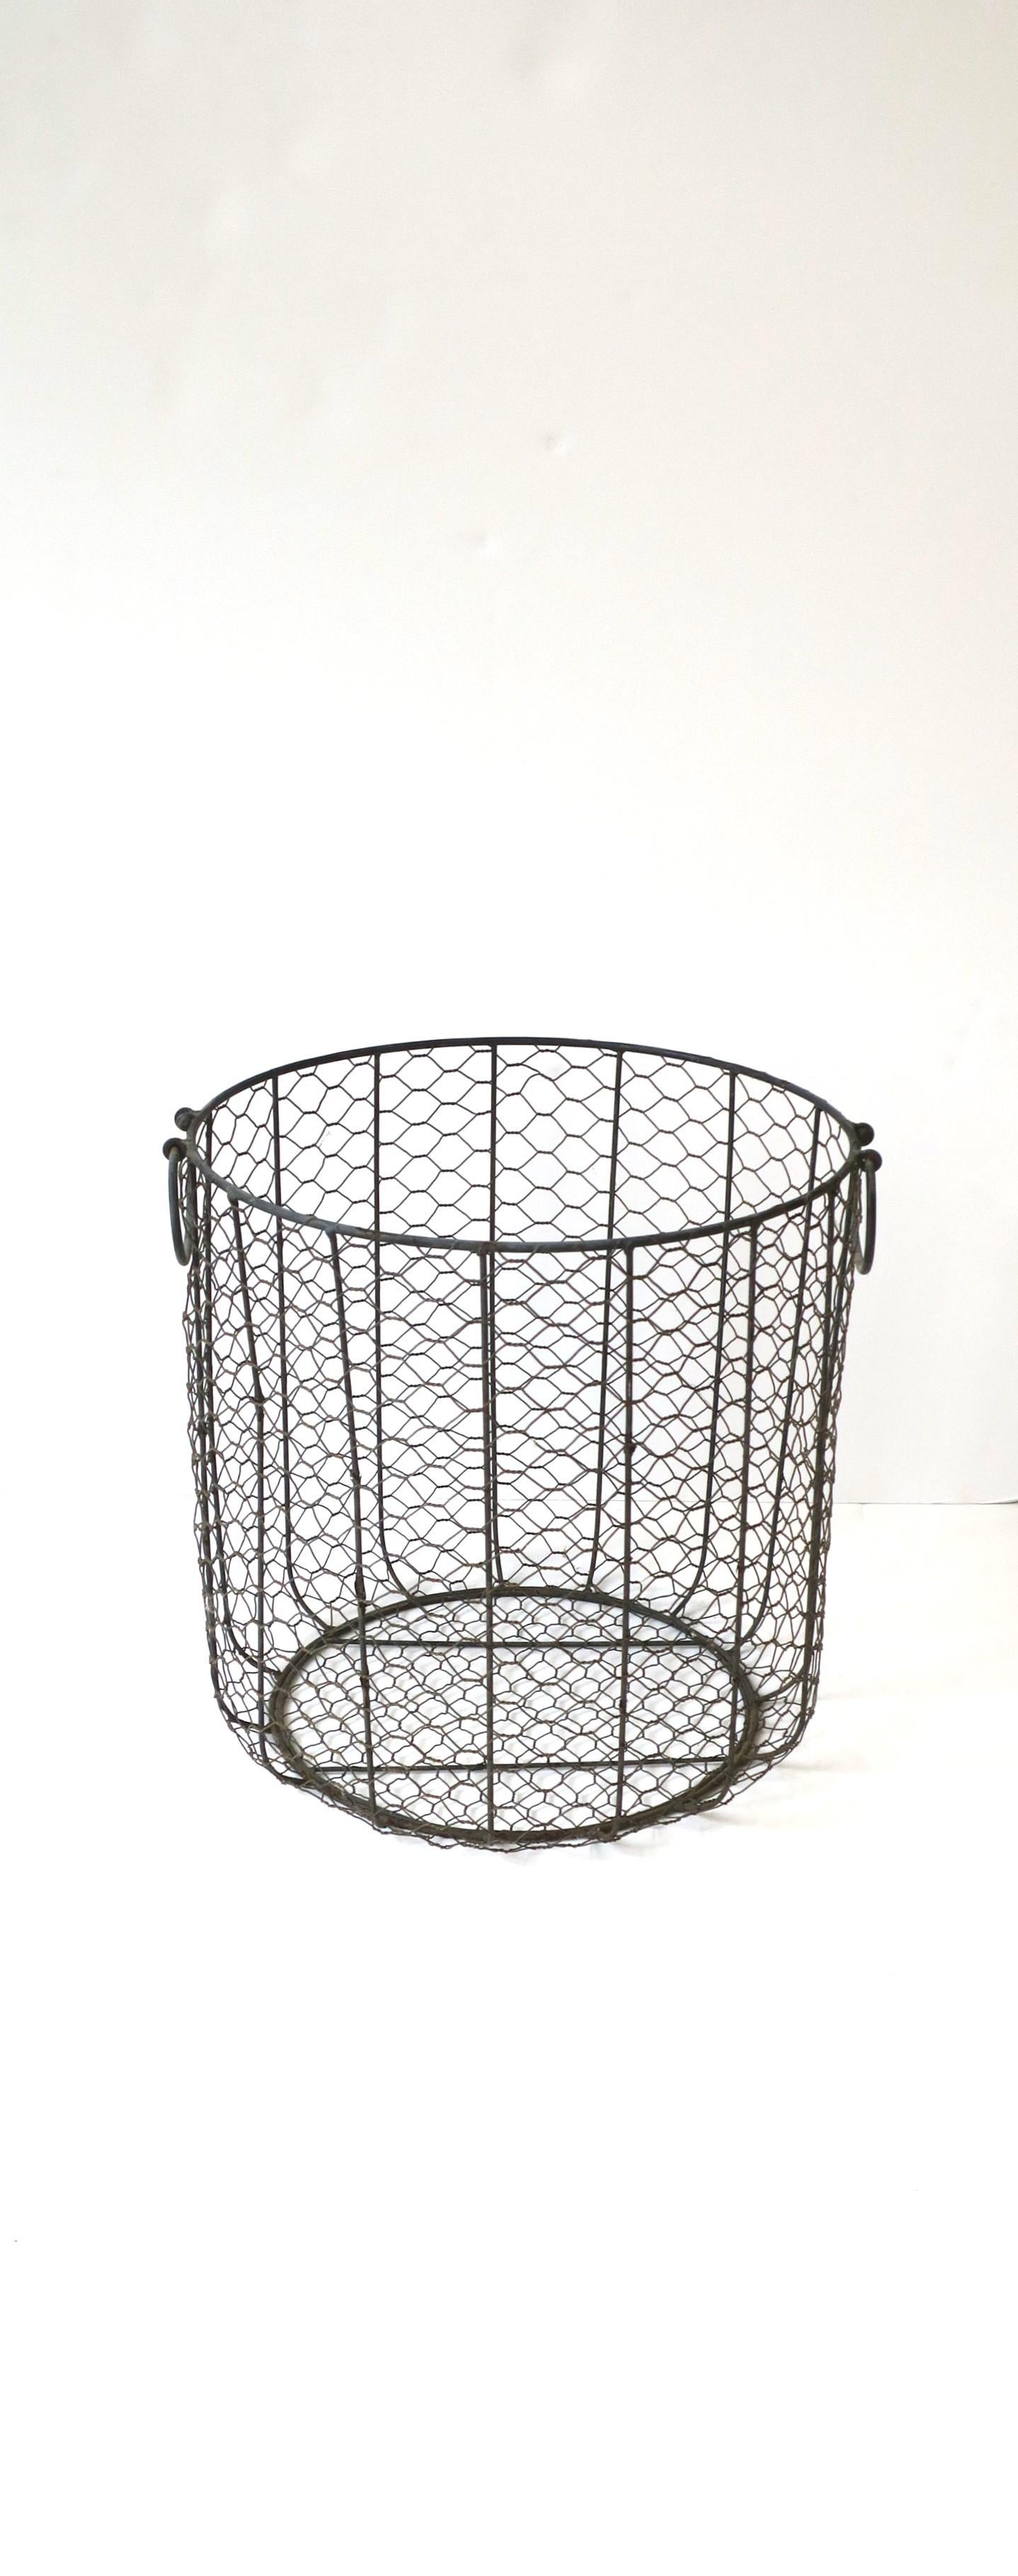 A metal wire basket, circa early-20th century. A great piece for a fireplace to hold firewood or for a bathroom or pool area, etc., to hold towels. Demonstrated holding bath towels. Piece is round with handles. Dimensions: 13.88